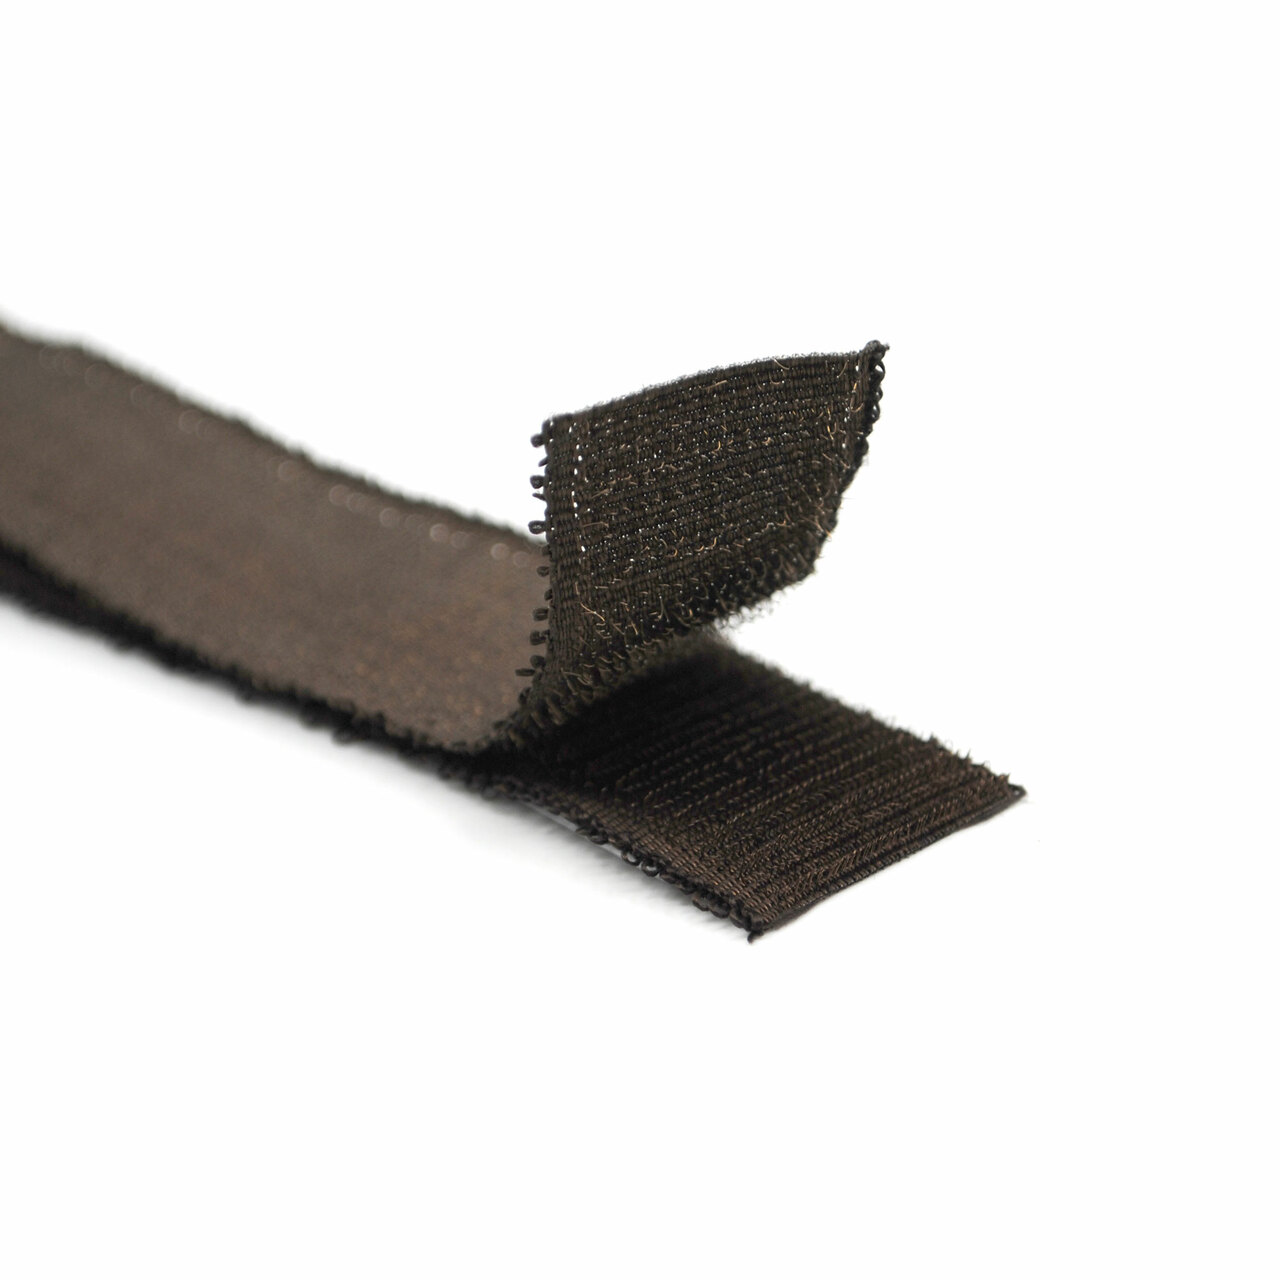 VELCRO® Brand Industrial Strength Extreme Hook and Loop Strips (10 Pac 